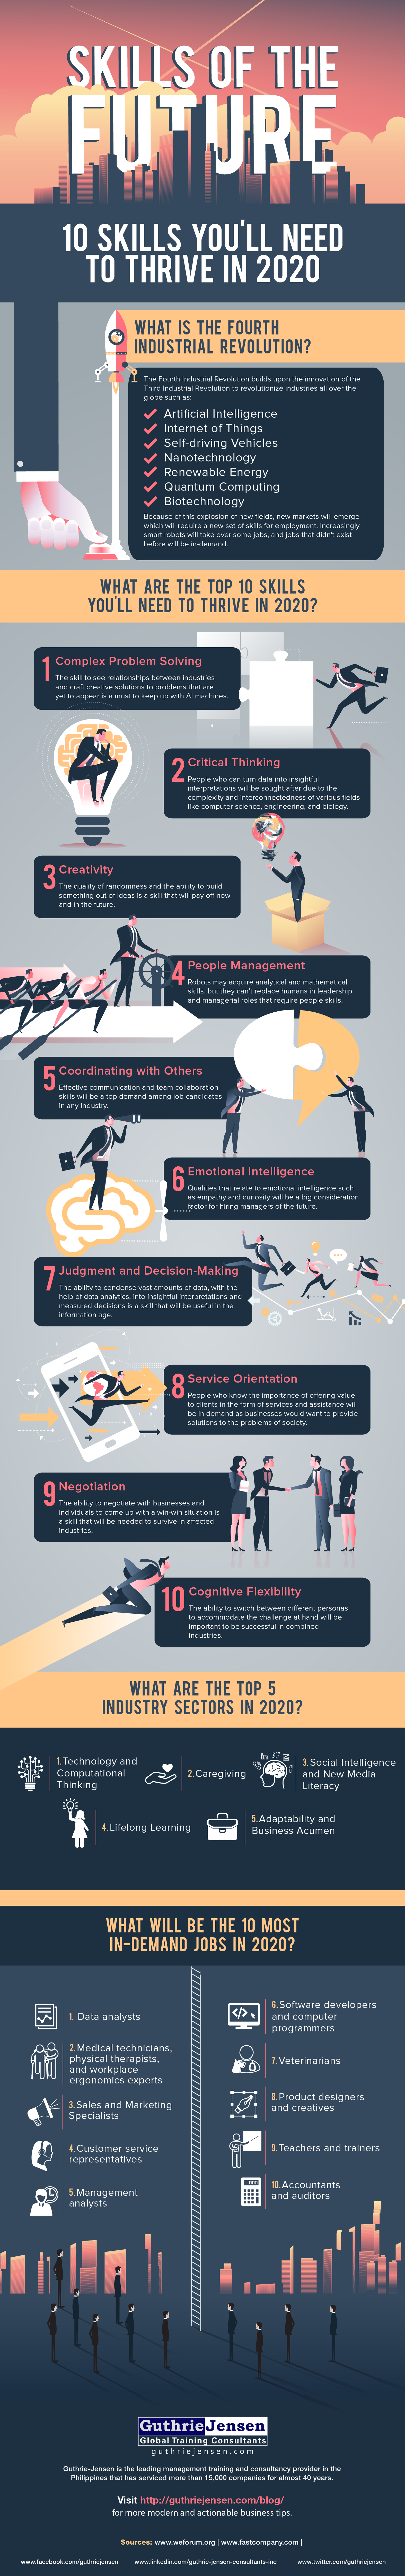 Skills of the Future - 10 Skills You'll Need to Thrive in 2020 Infographic